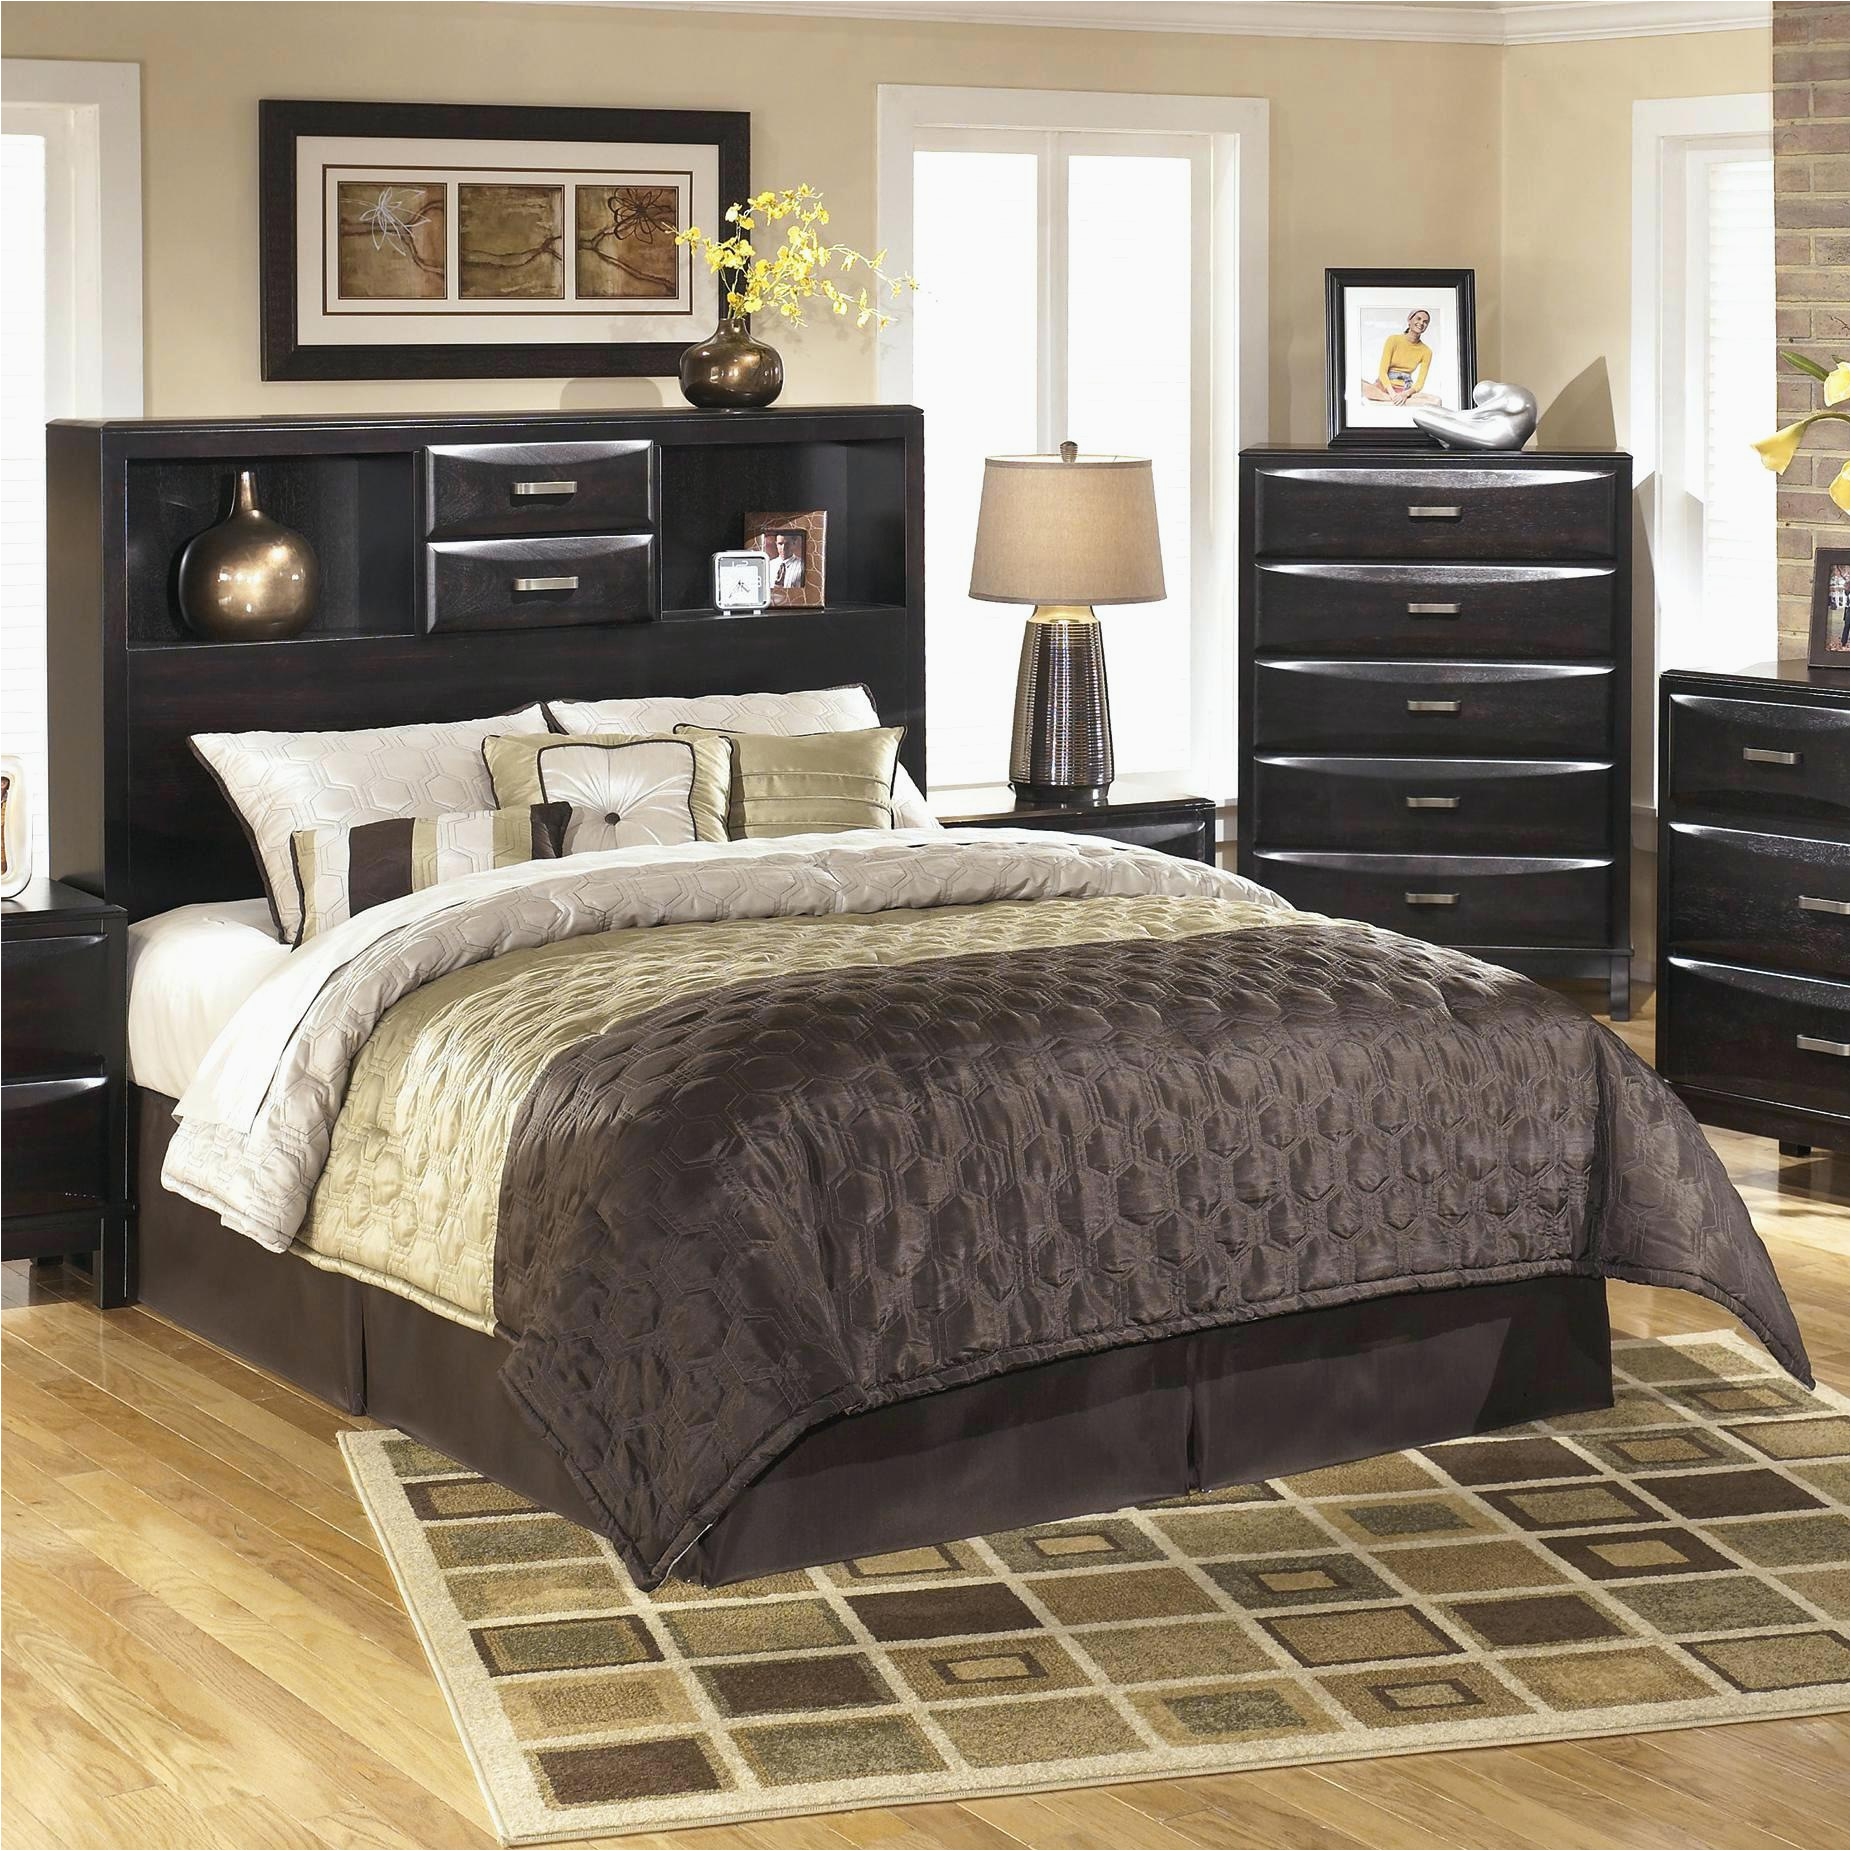 Gorgeous ashley Furniture Porter Bedroom Set Reviews In 44 Fresh ashley Furniture Media Chest Graph